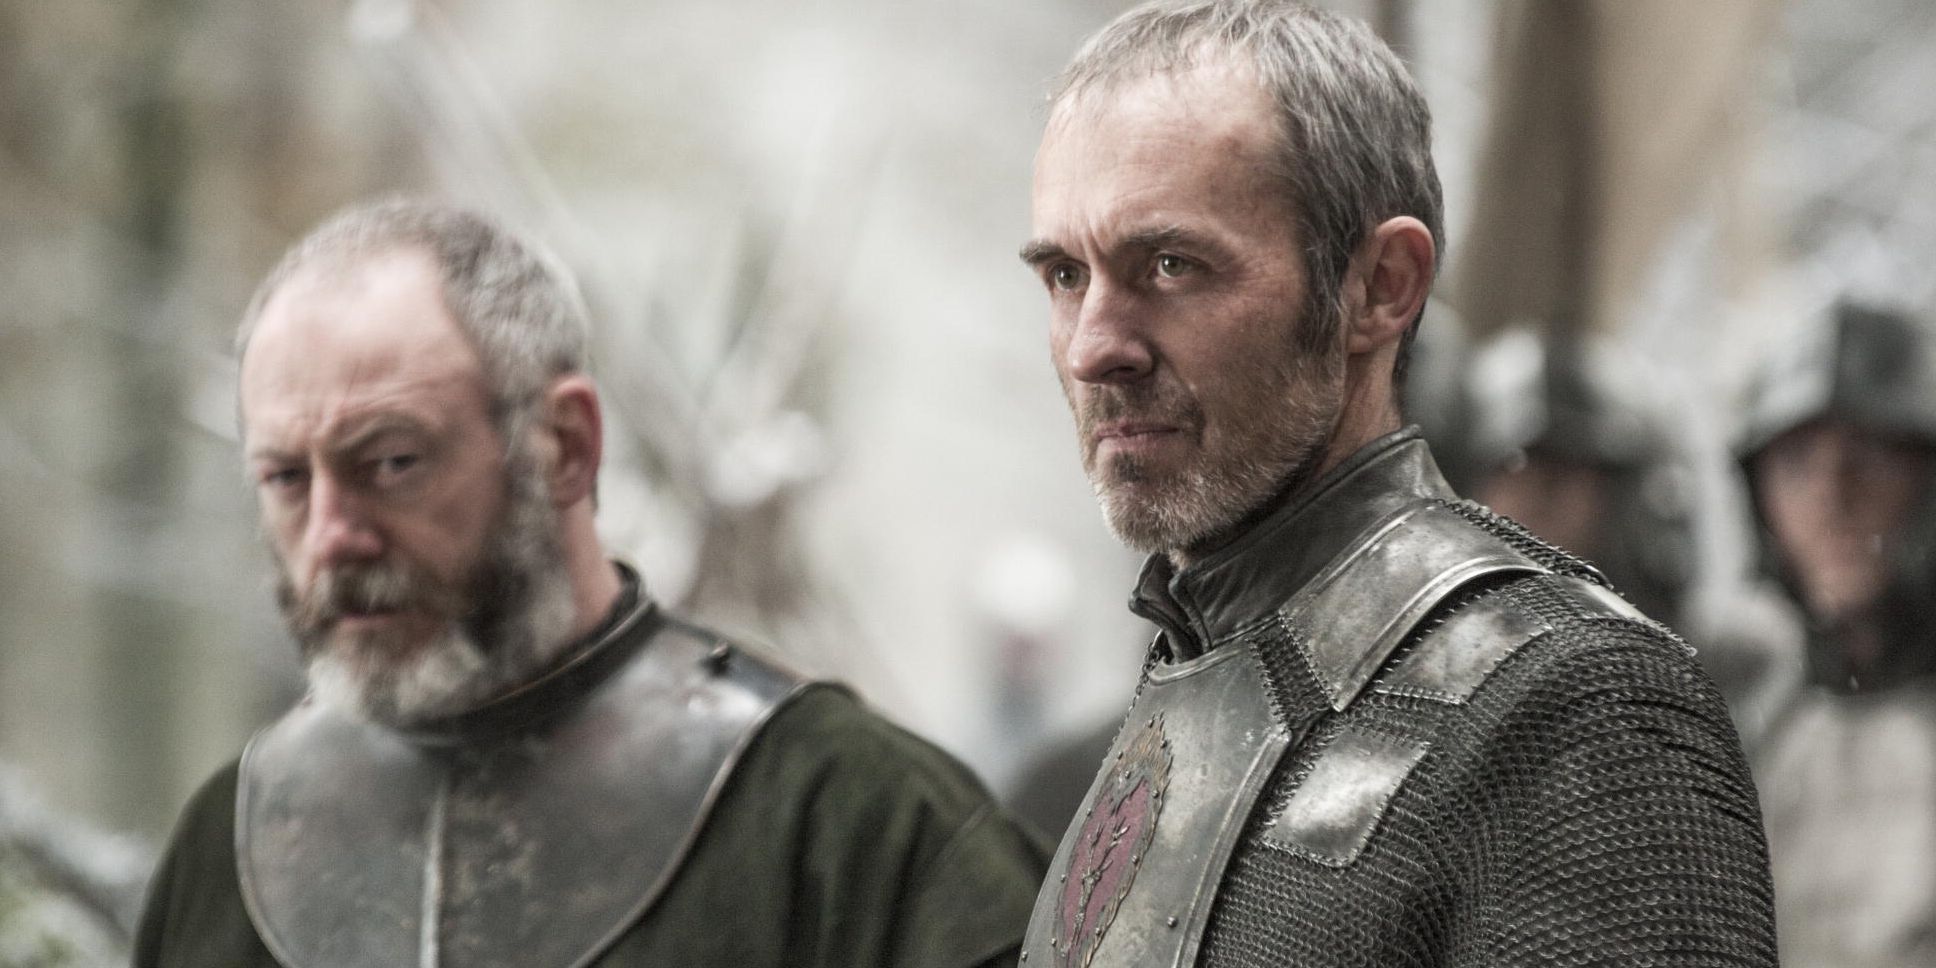 Davos Seaworth as Hand of the King to Stannis Baratheon